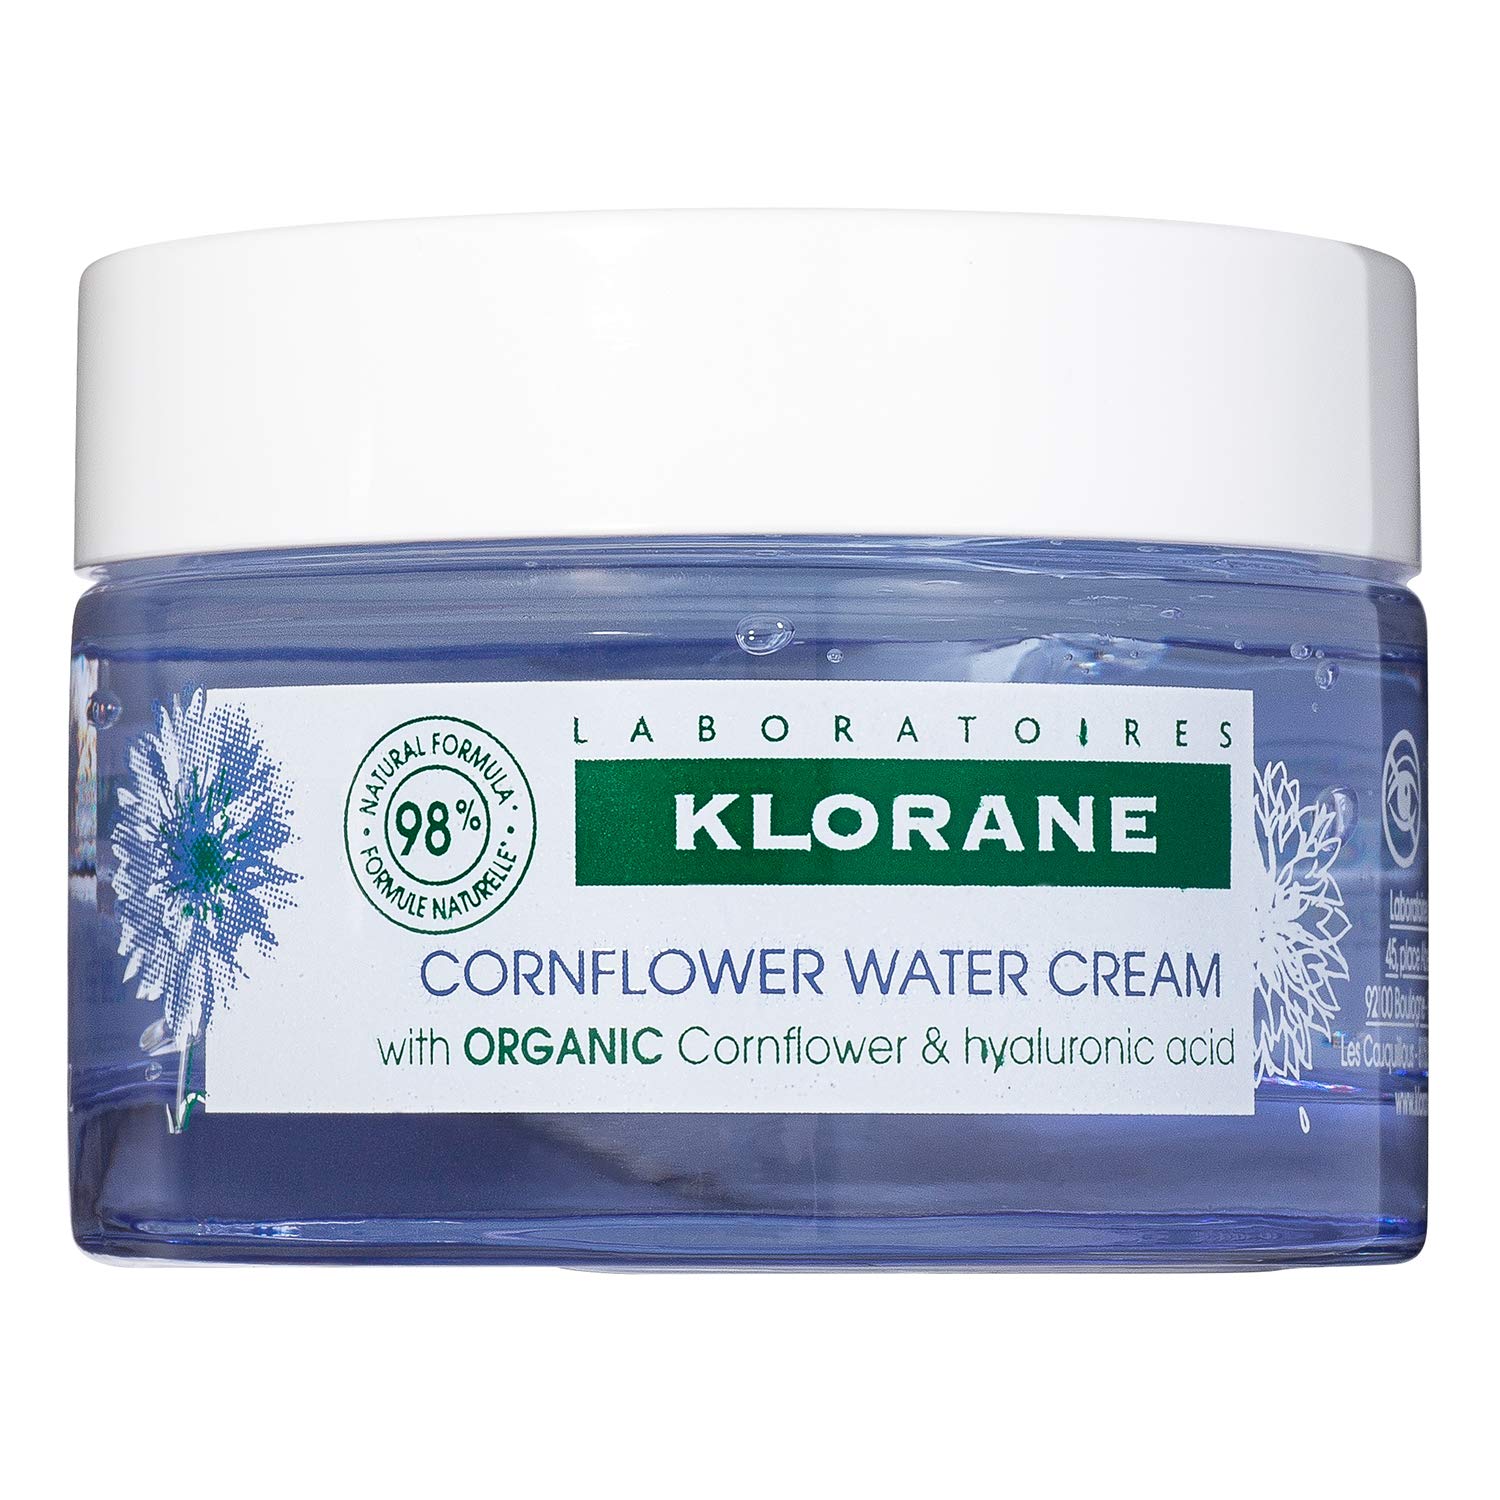 Klorane - Hydrating Water Cream with Organically Farmed Cornflower & Hyaluronic Acid - Plumping & Brightening - For Puffiness & Dark Circles - Paraben & Silicone-Free - 1.6 fl. oz